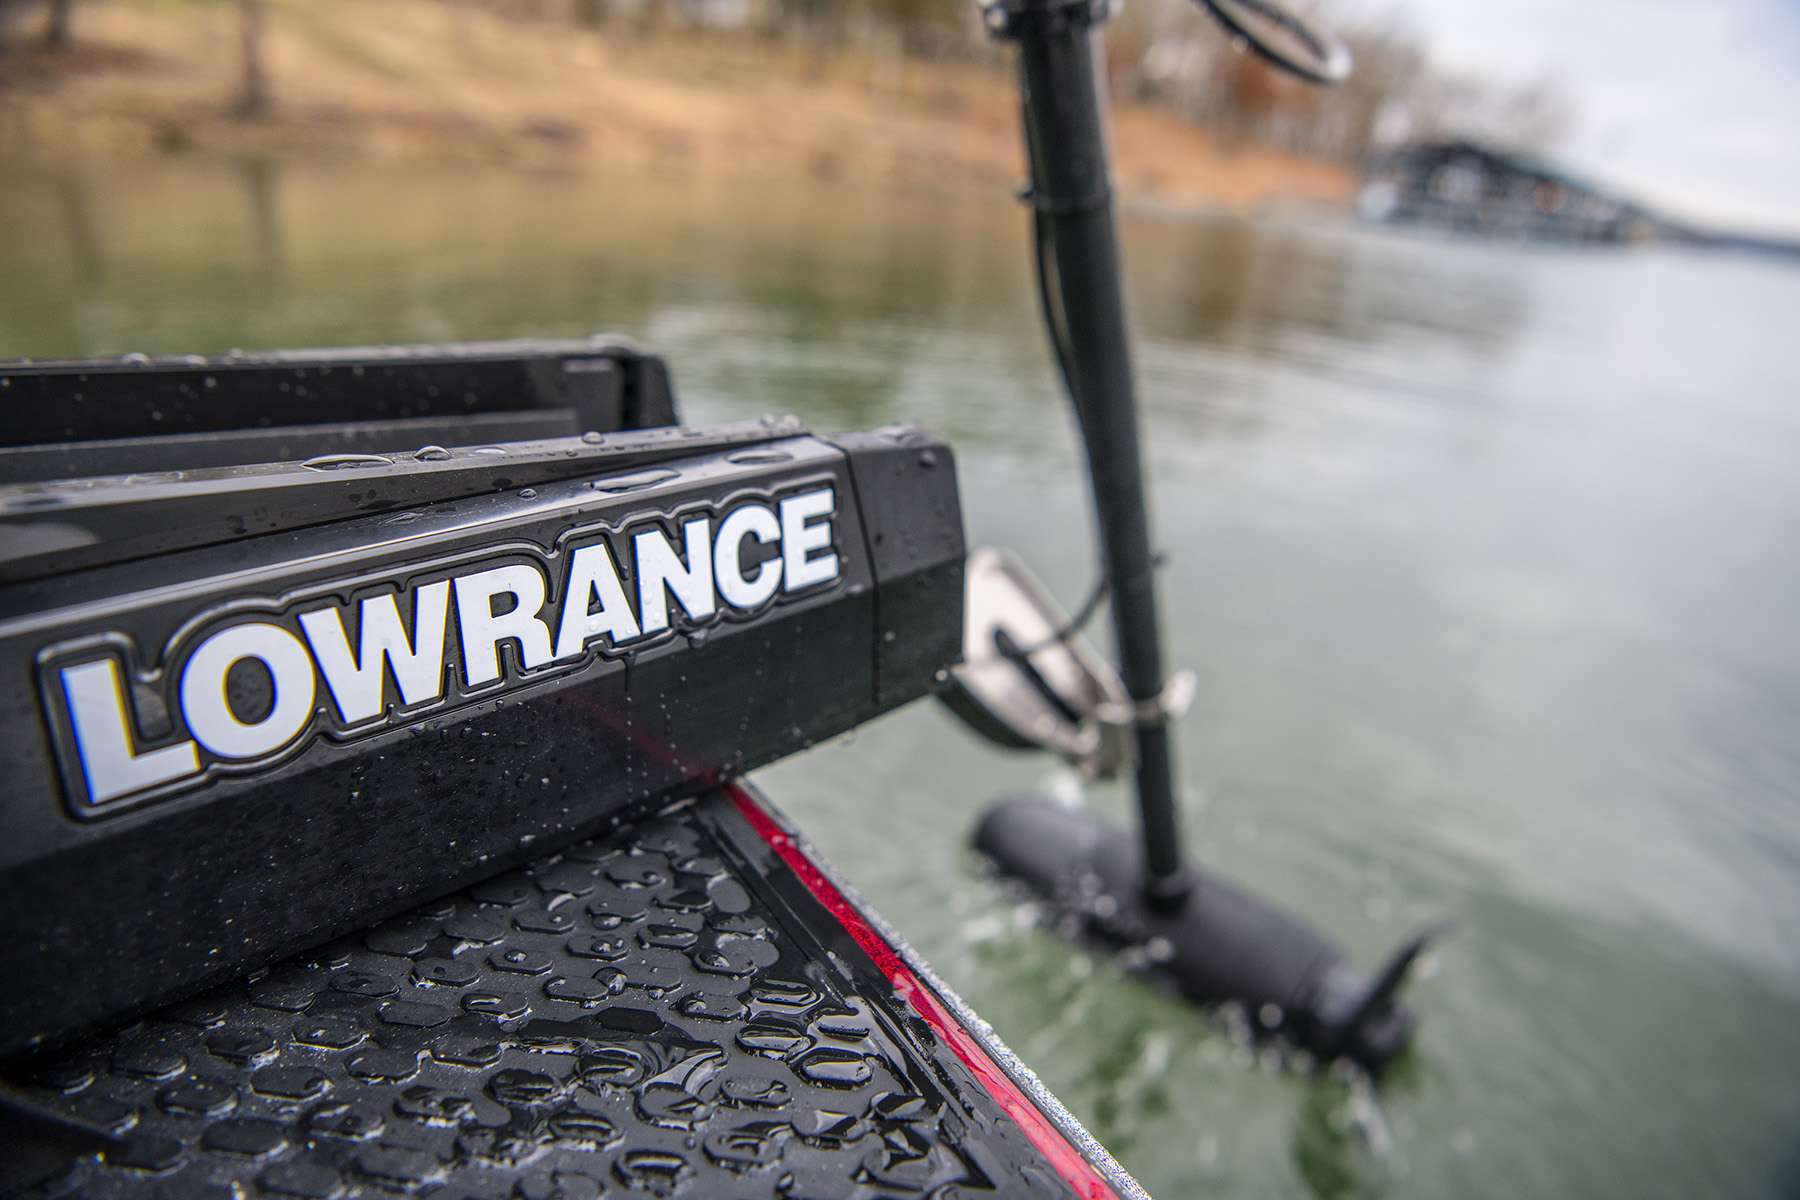 <B>Plug-and-Play Lowrance Sonar</b><BR>
Ghost offers two integrated sonar nosecone options, including HDI (CHIRP and DownScan Imagingâ¢) and optional Active Imaging 3-in-1 (CHIRP Sonar, SideScan and DownScan Imagingâ¢) transducers. All motors ship standard with an HDI transducer, but can be upgraded with a different nosecone at any time.
